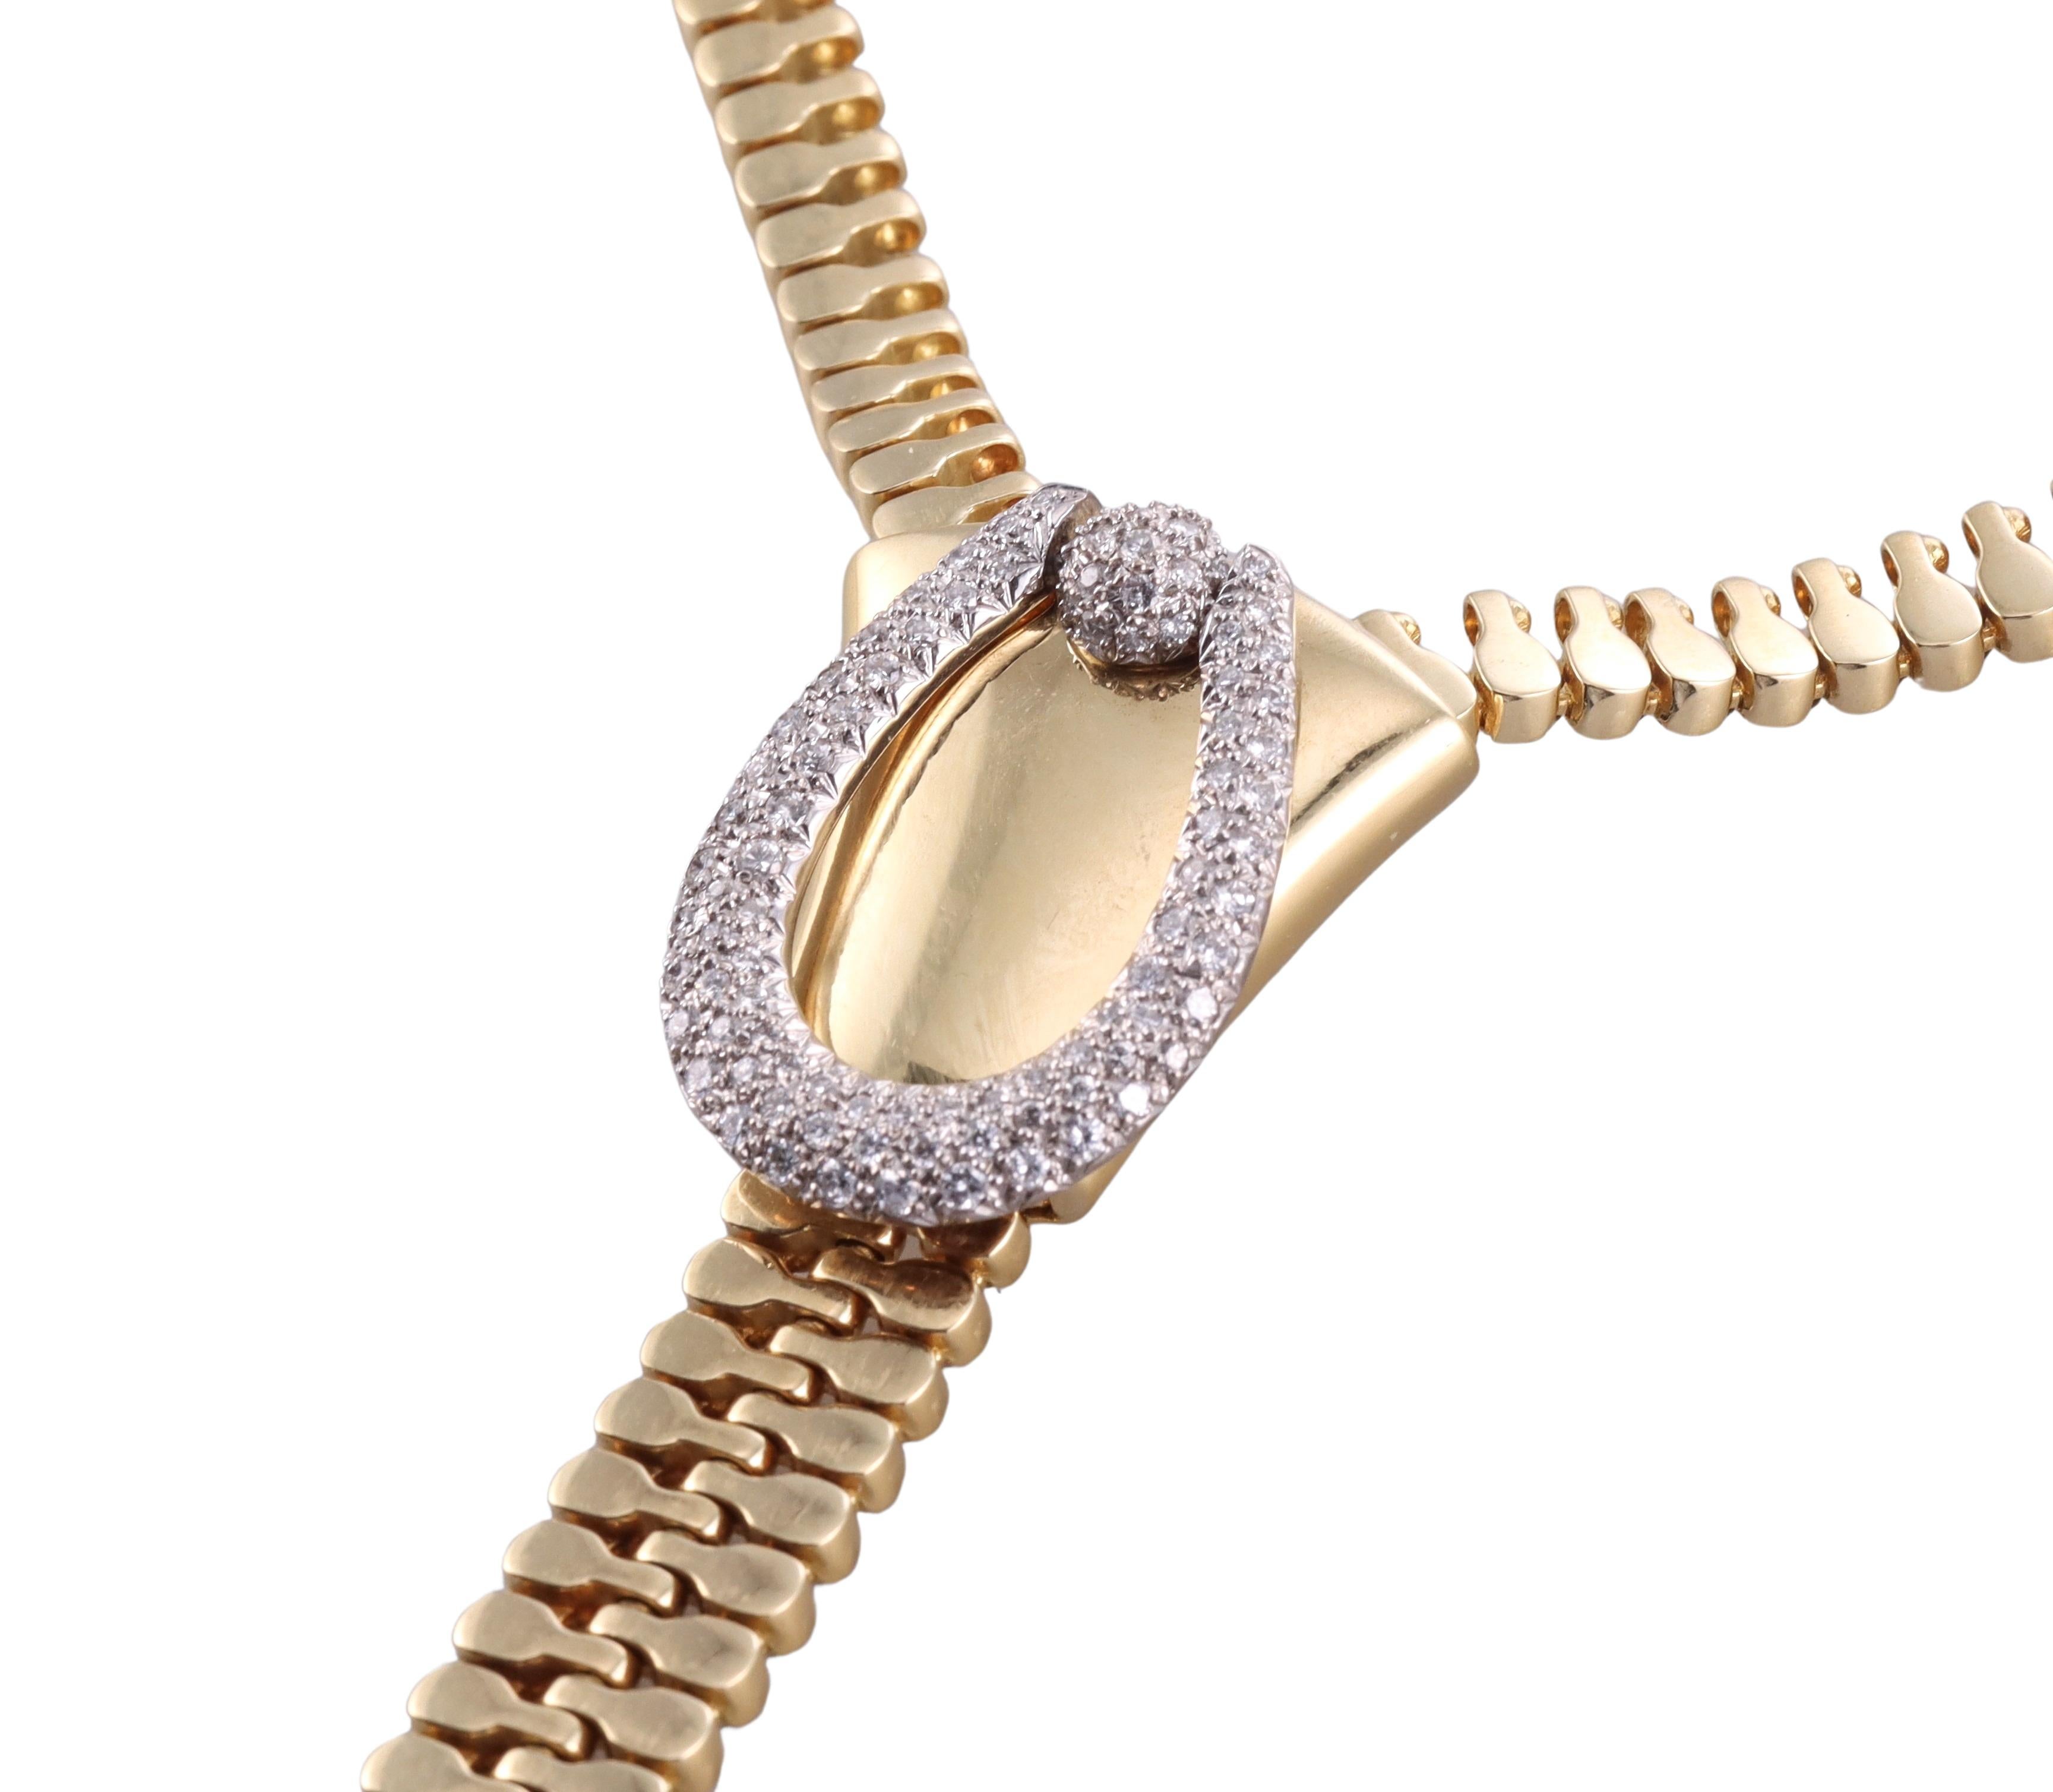 Iconic zipper design necklace, set in 18k yellow gold, with a diamond buckle - approximately 1.10ctw H-SI1 diamonds. The necklace has an adjustable wearable length, with a fully functioning zipper - please refer to the video. Total maximum length is